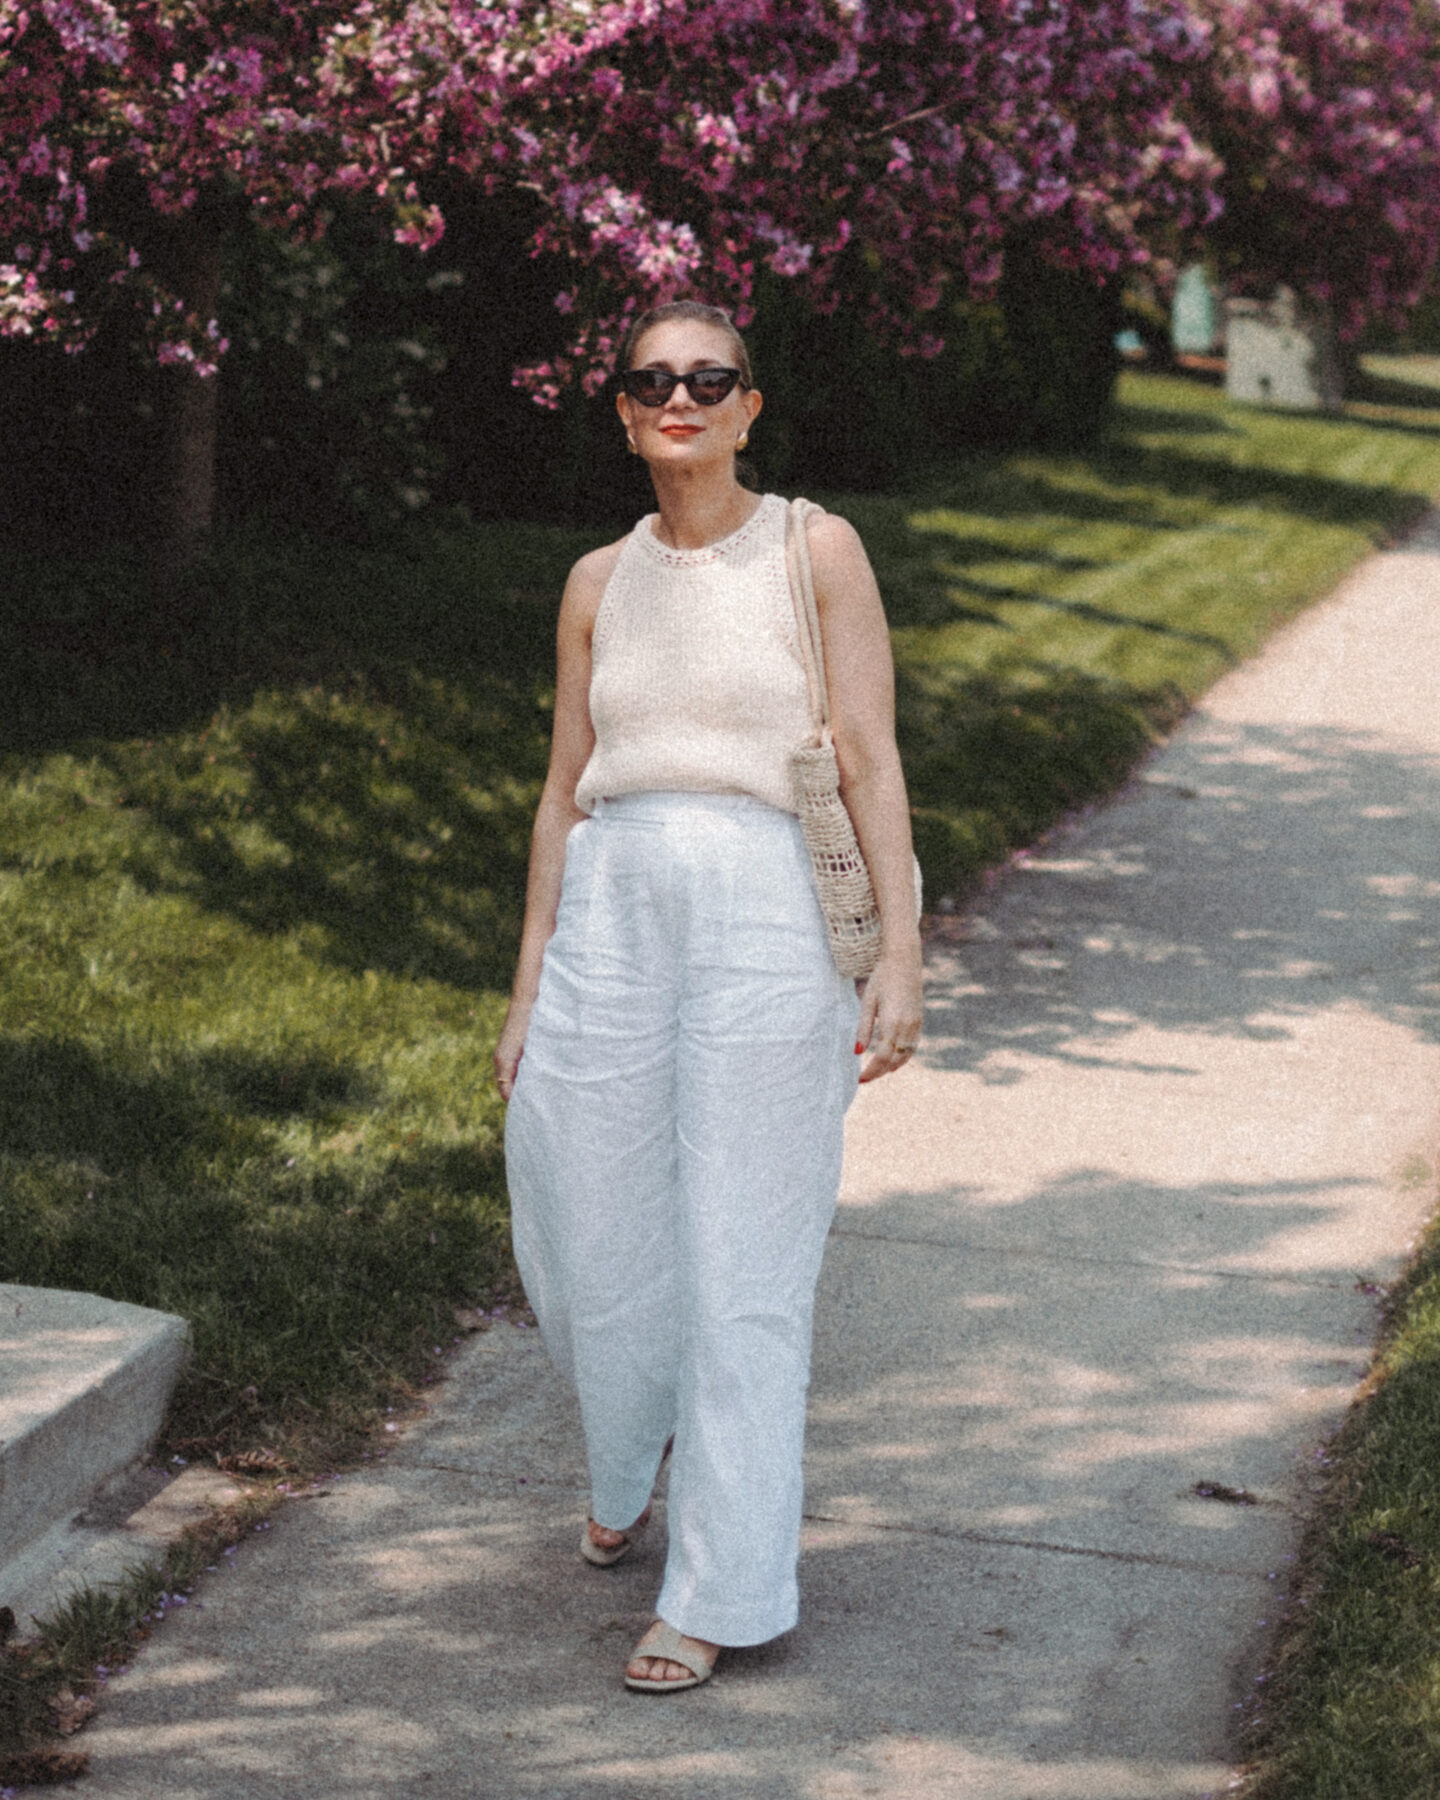 Karin Emily wears a cream sweater tank and white linen pair of pants while walking in front of a row of lilac bushes 